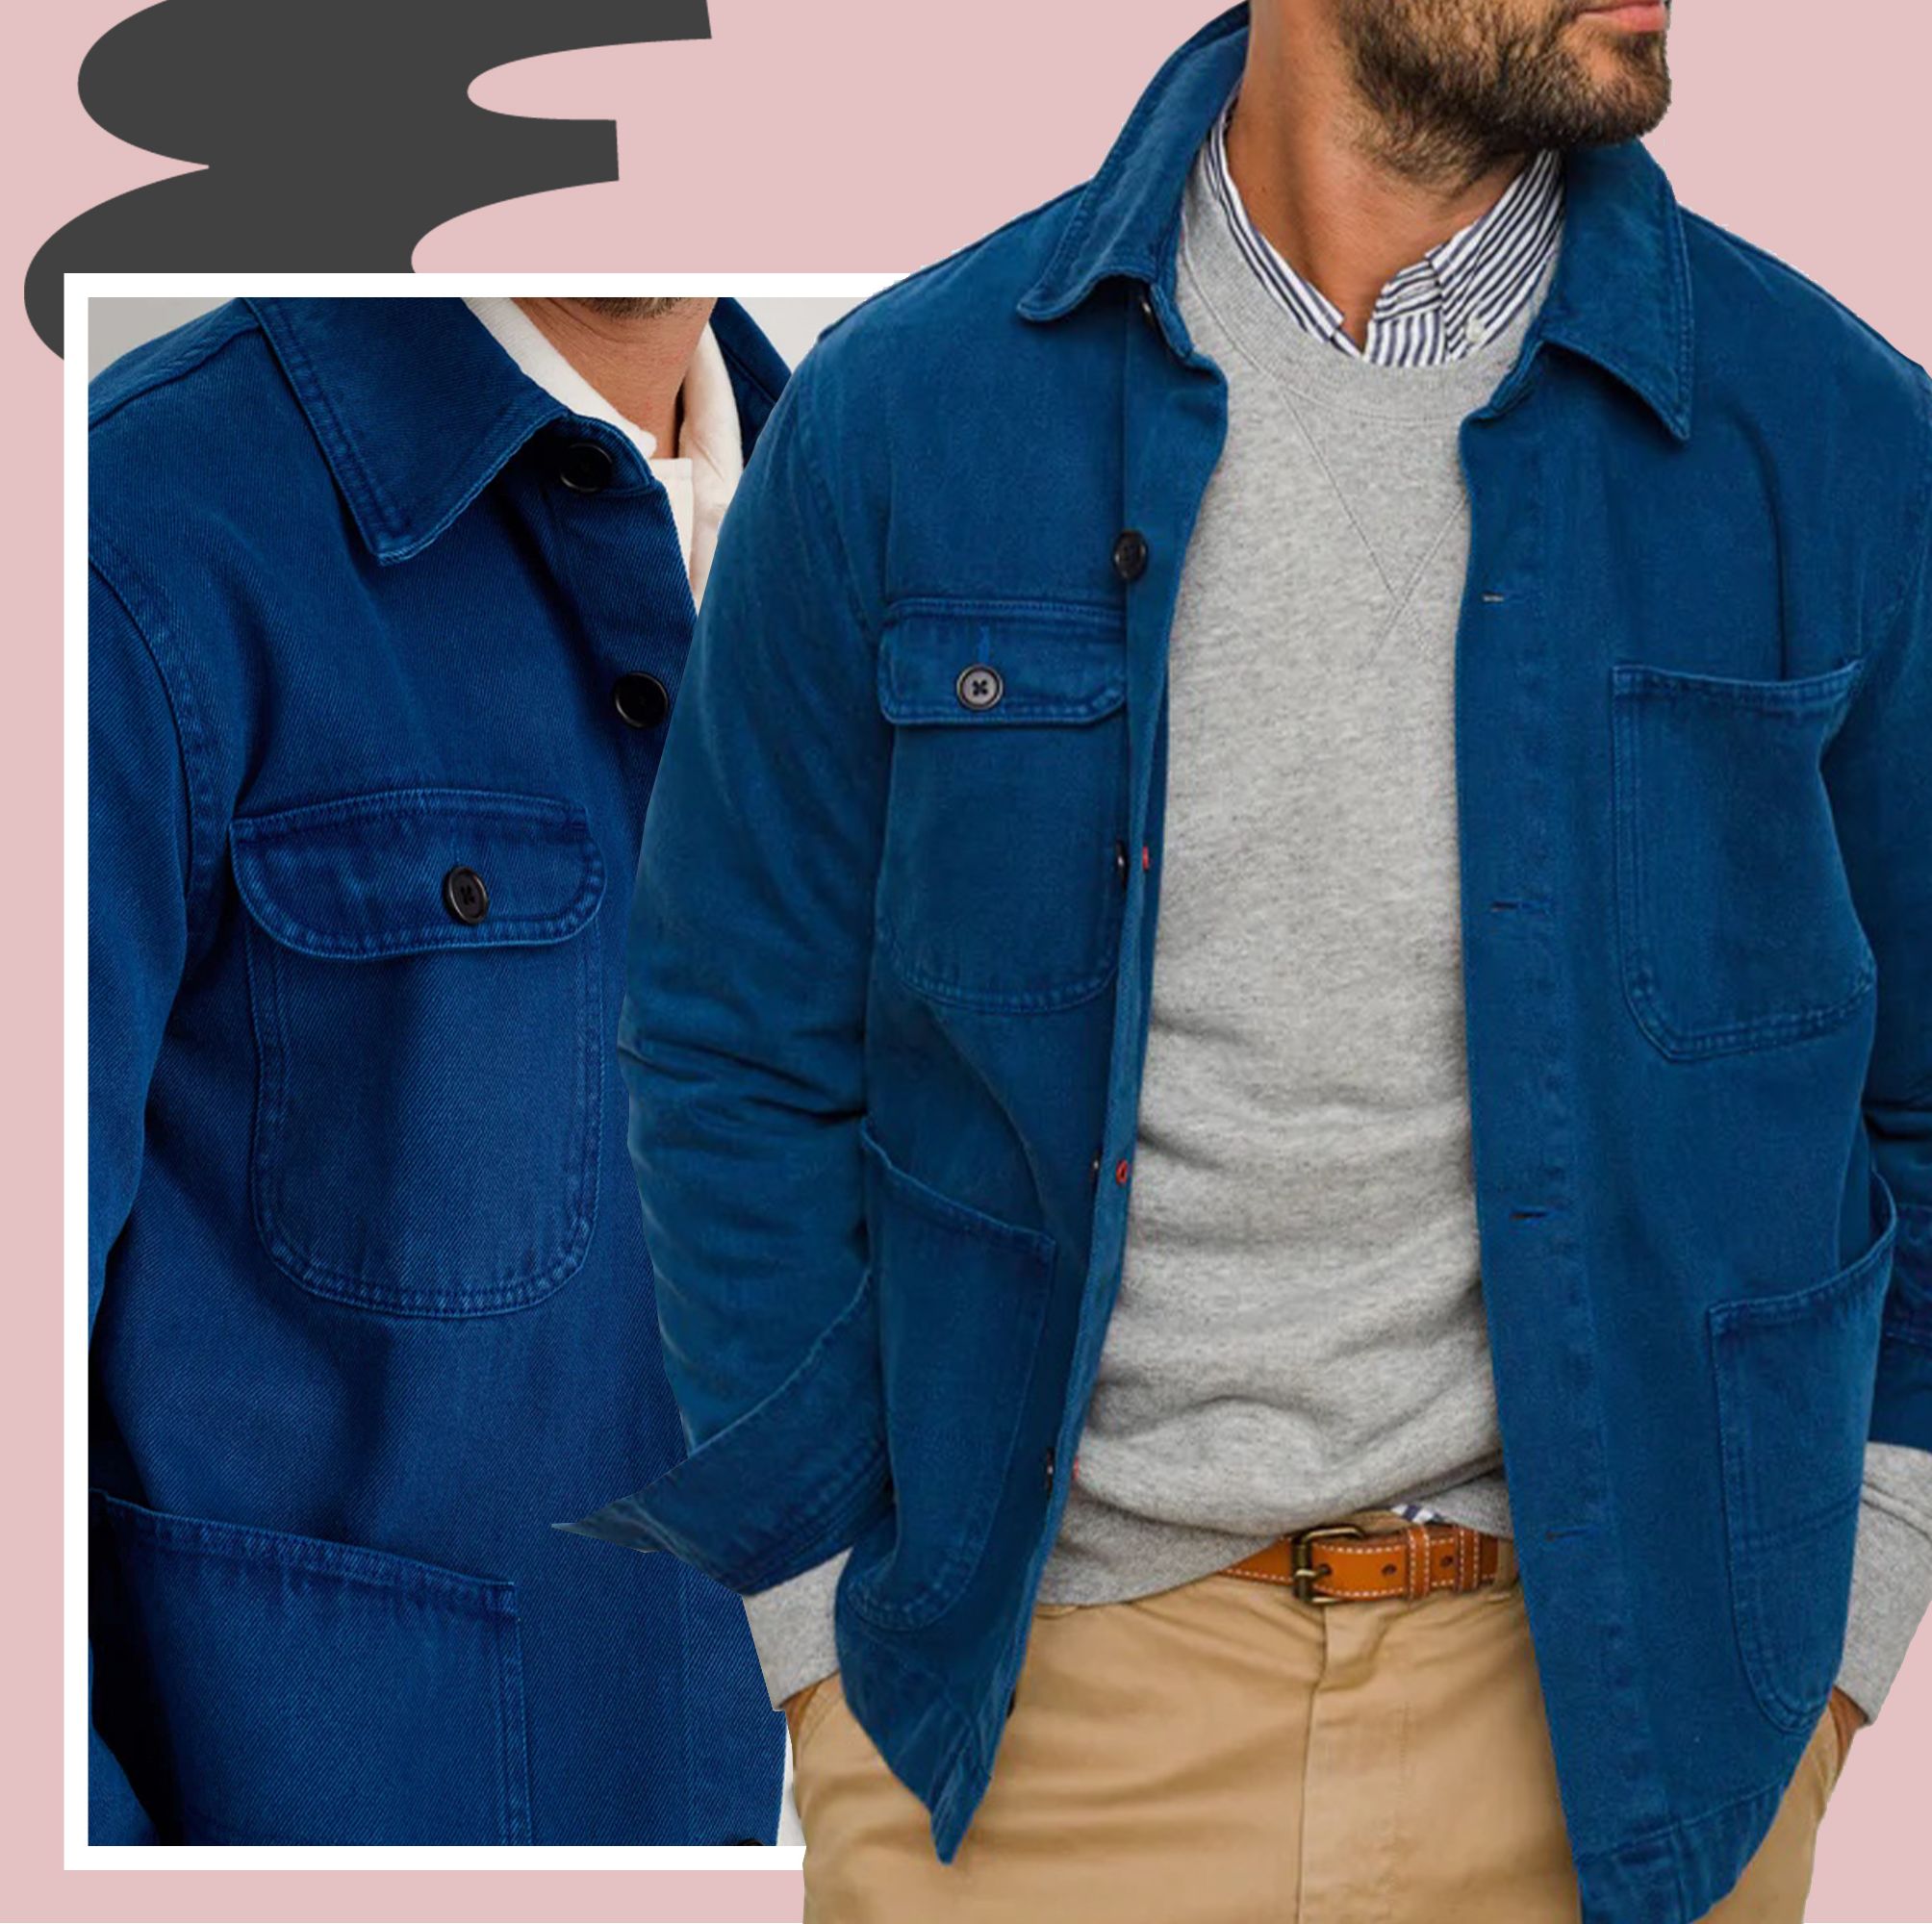 These 15 Work Jackets Are Ruggedly Cool Spring Essentials